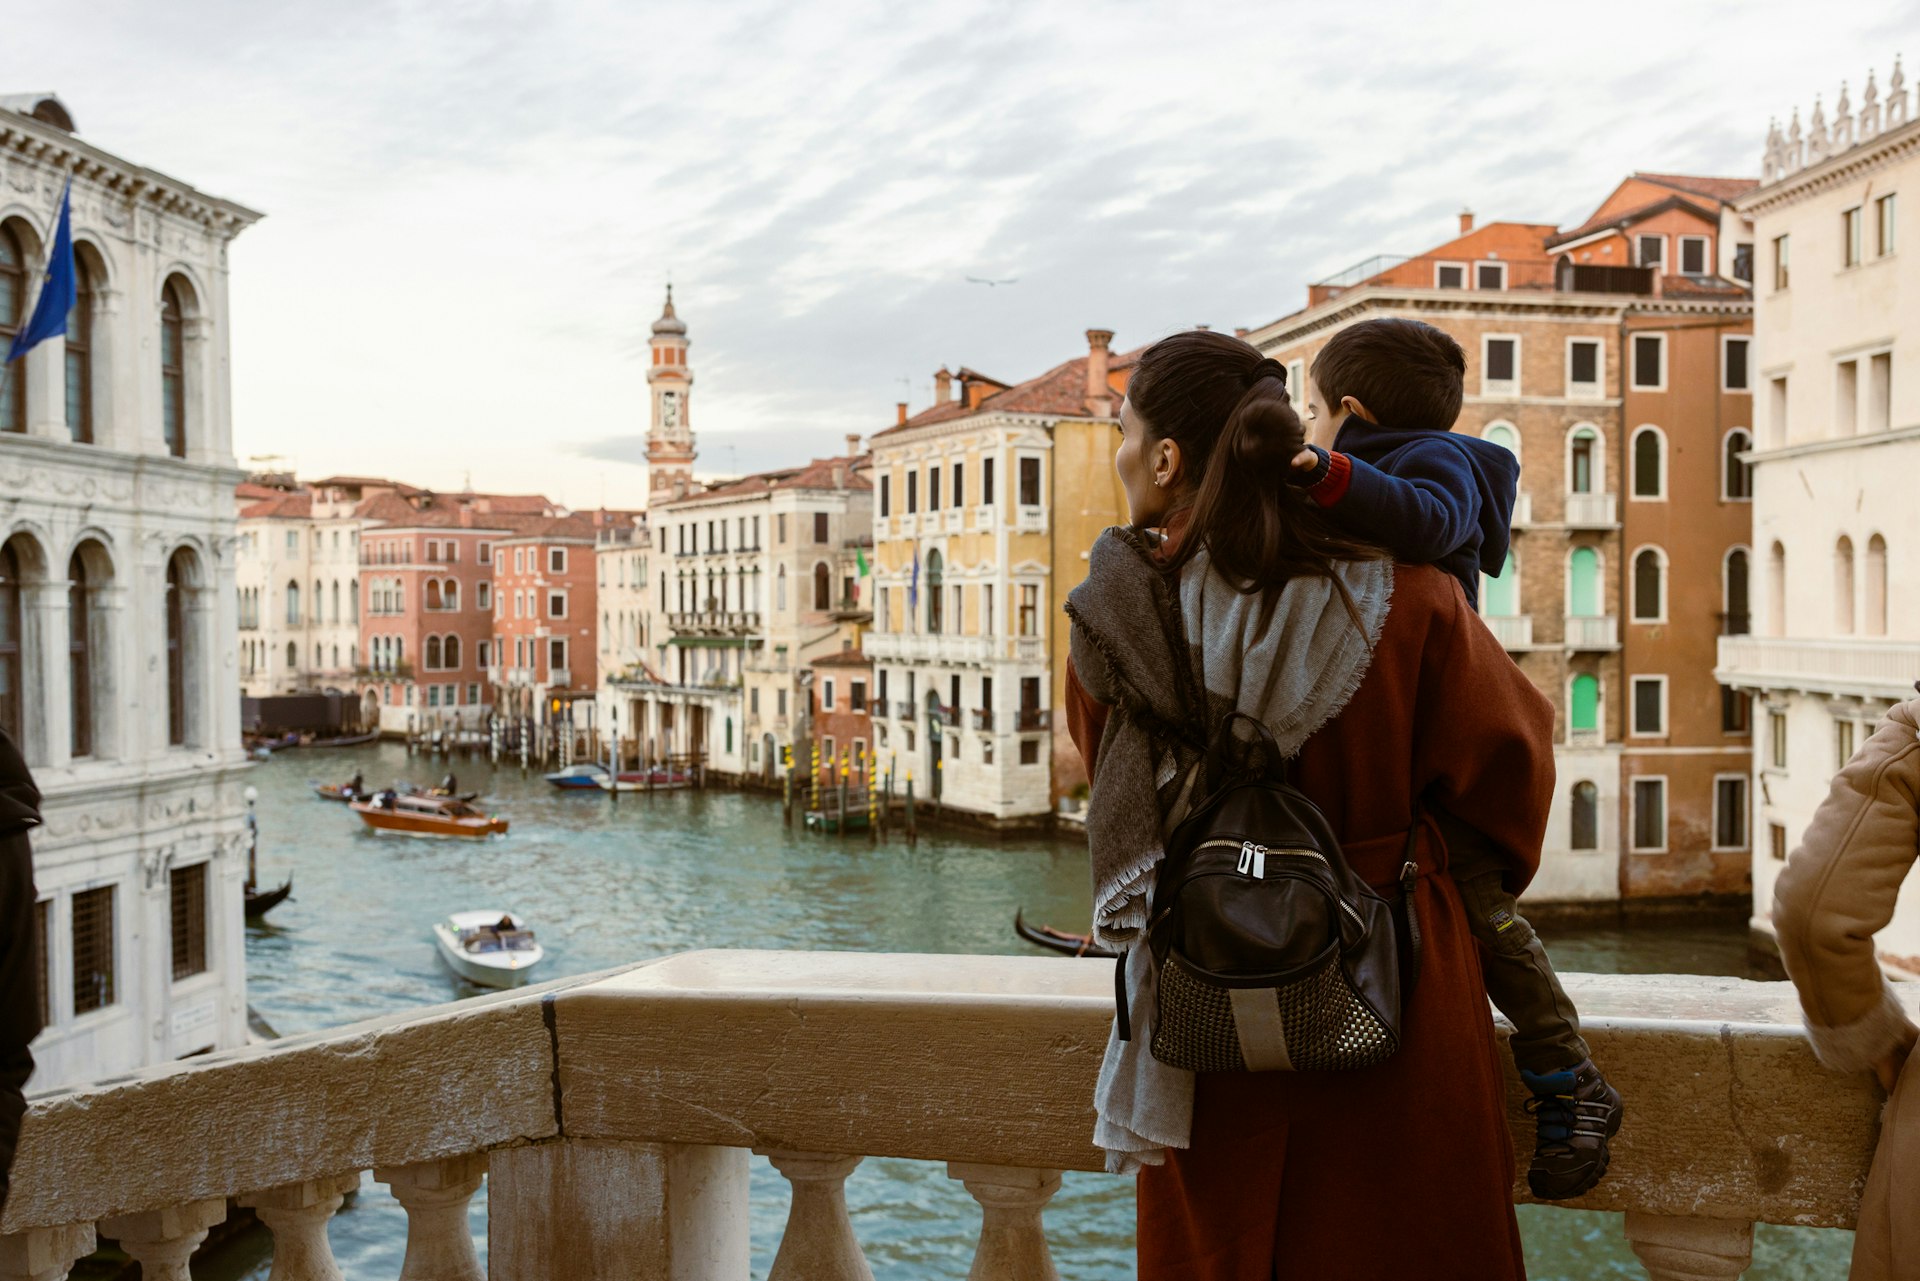 Mother is carrying her son as they enjoy a tourist visit to Venice. They are standing on a bridge overlooking the Grand Canal, with gondolas and boats passing by. The magnificent architecture and stunning waterways of Venice are on full display, providing a picturesque backdrop for their memorable trip